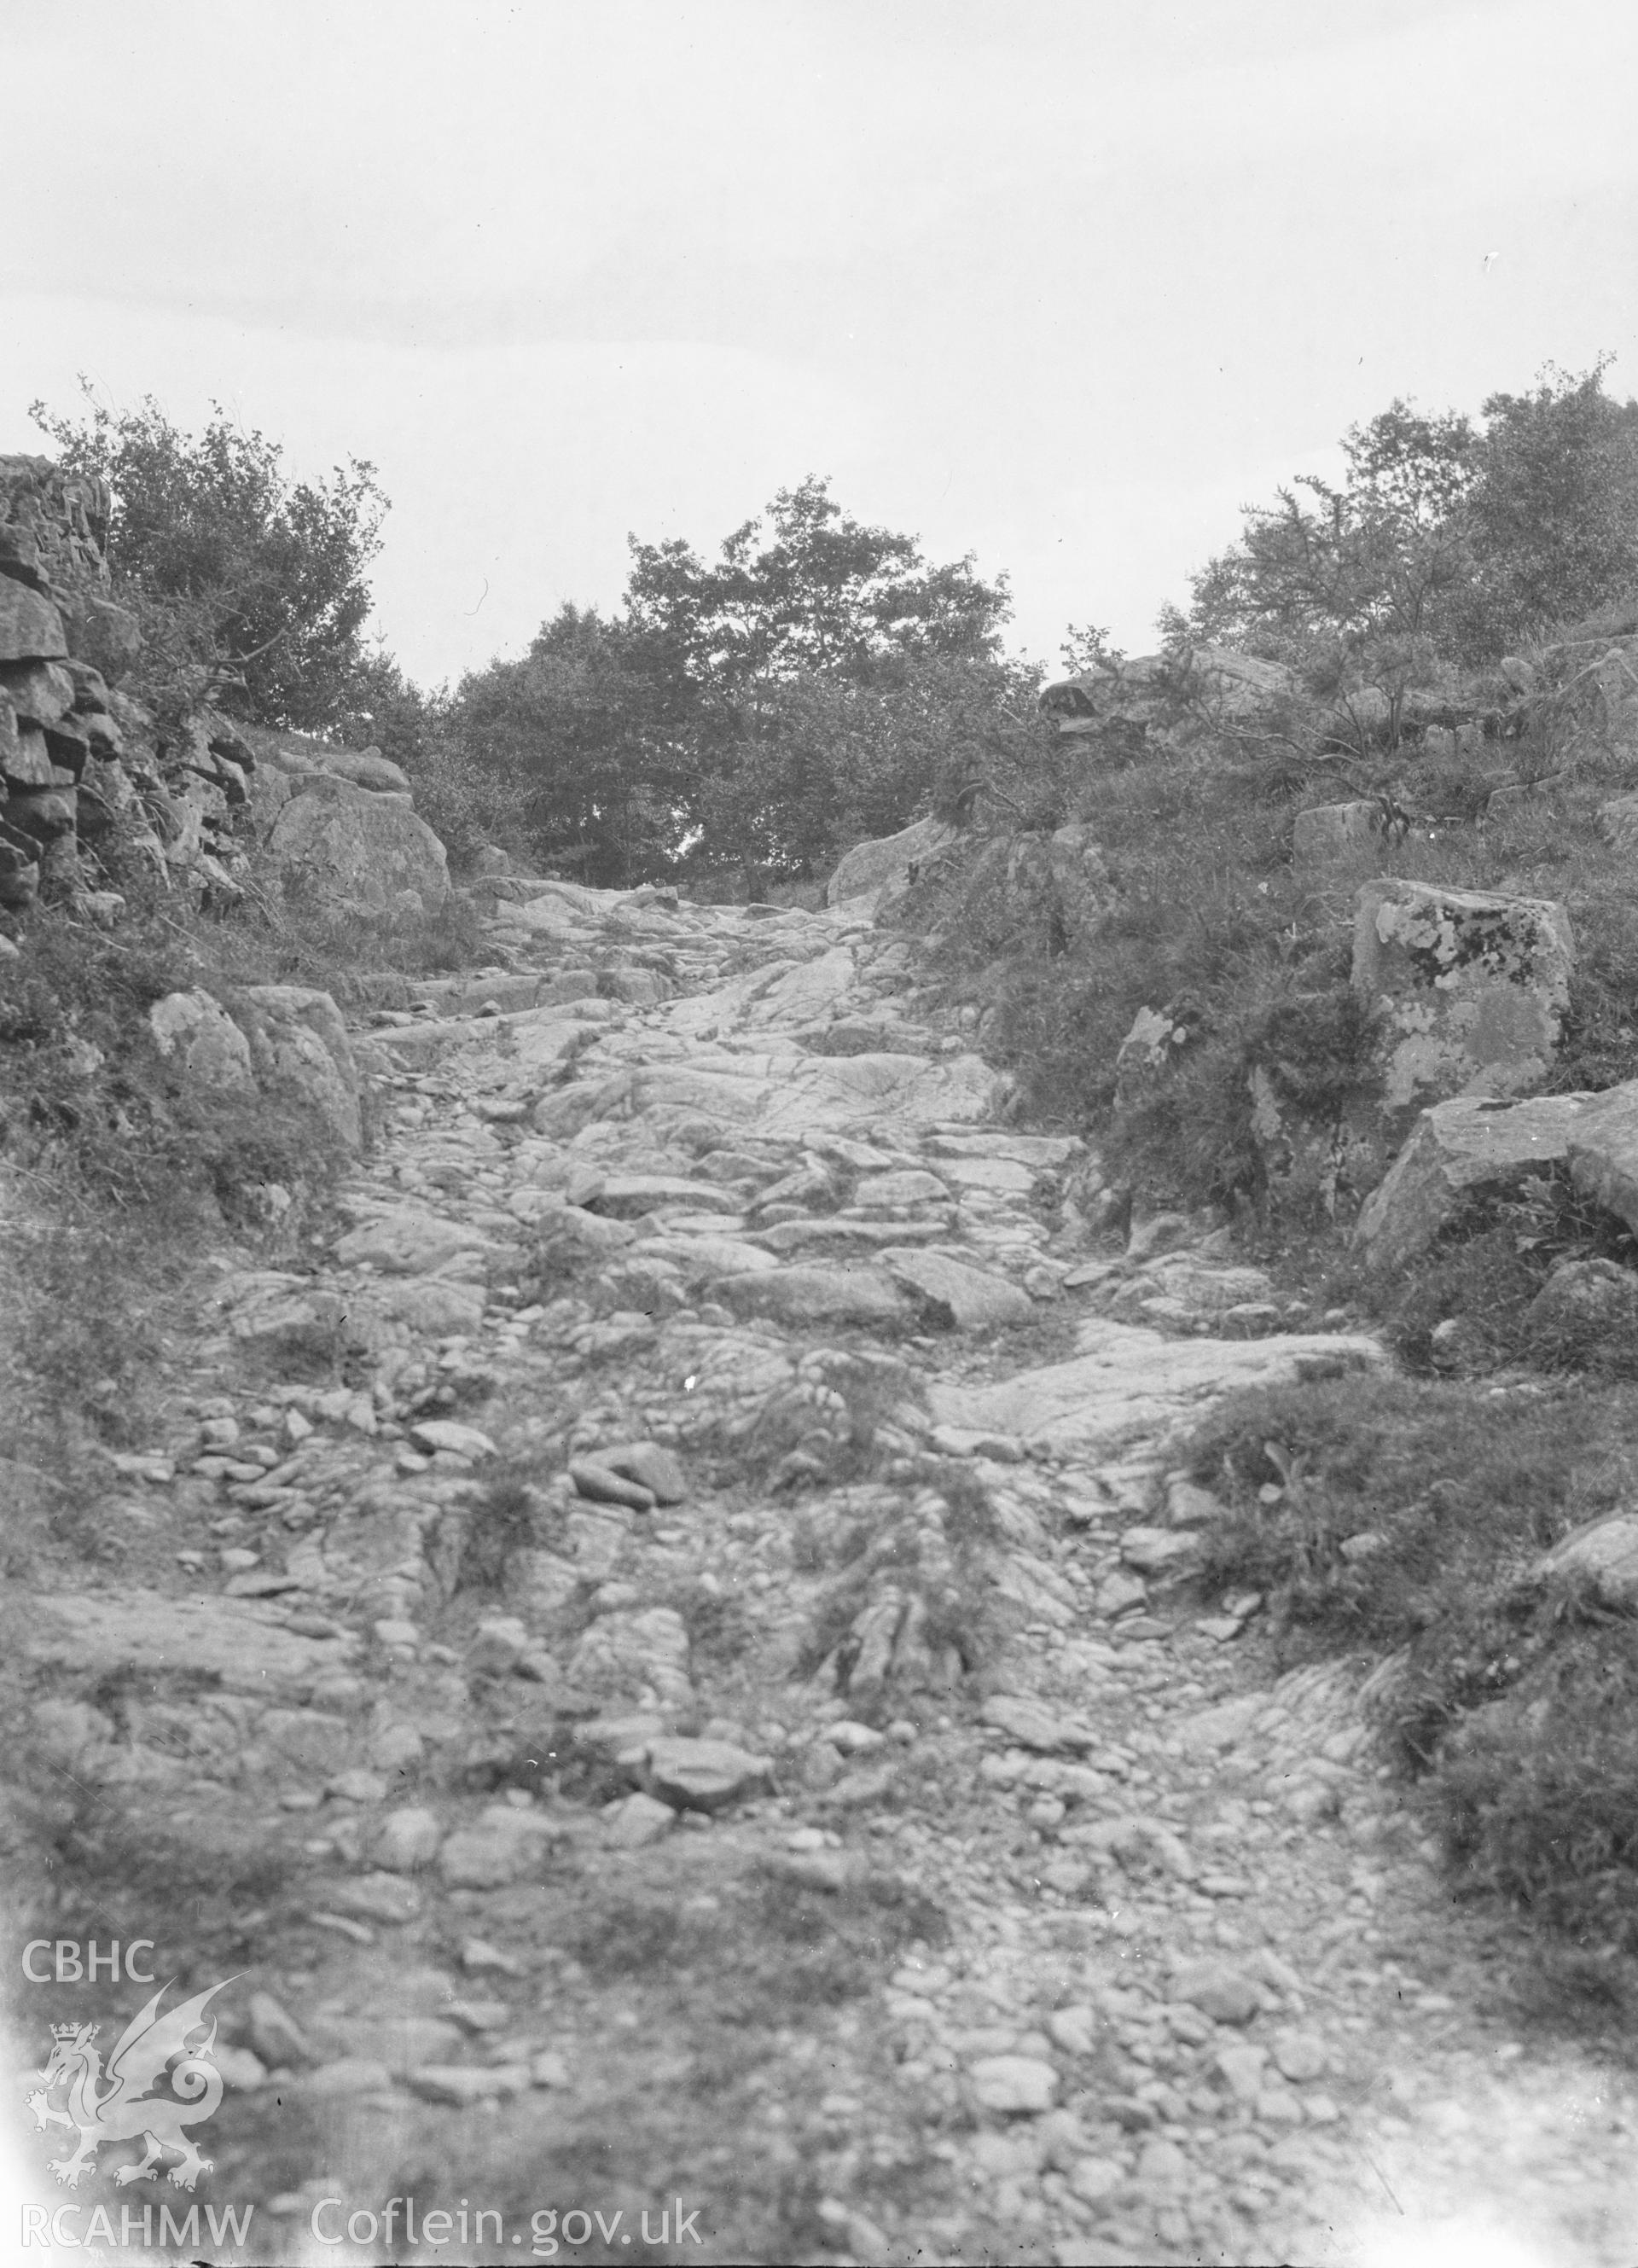 Digital copy of a nitrate negative showing Bryn y Gefeiliau Roman site. Reverse of black and white photograph reads: 'Caern. Capel Curig. Roman Road above Bryn y Gefeiliau / 7.VI.22.' From the Cadw Monuments in Care Collection.